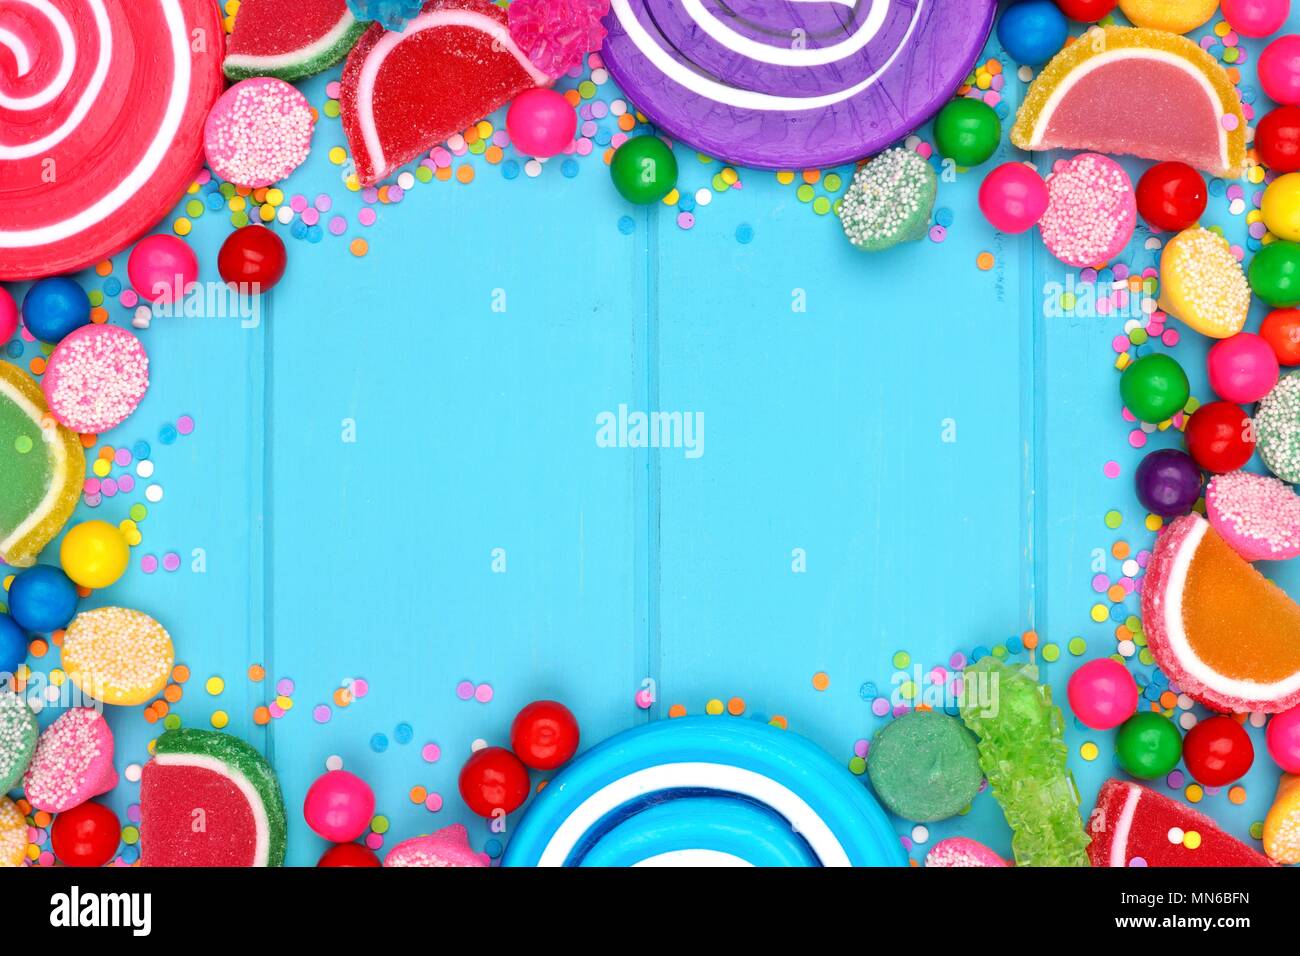 Frame of assorted colorful candies against a blue wood background Stock Photo